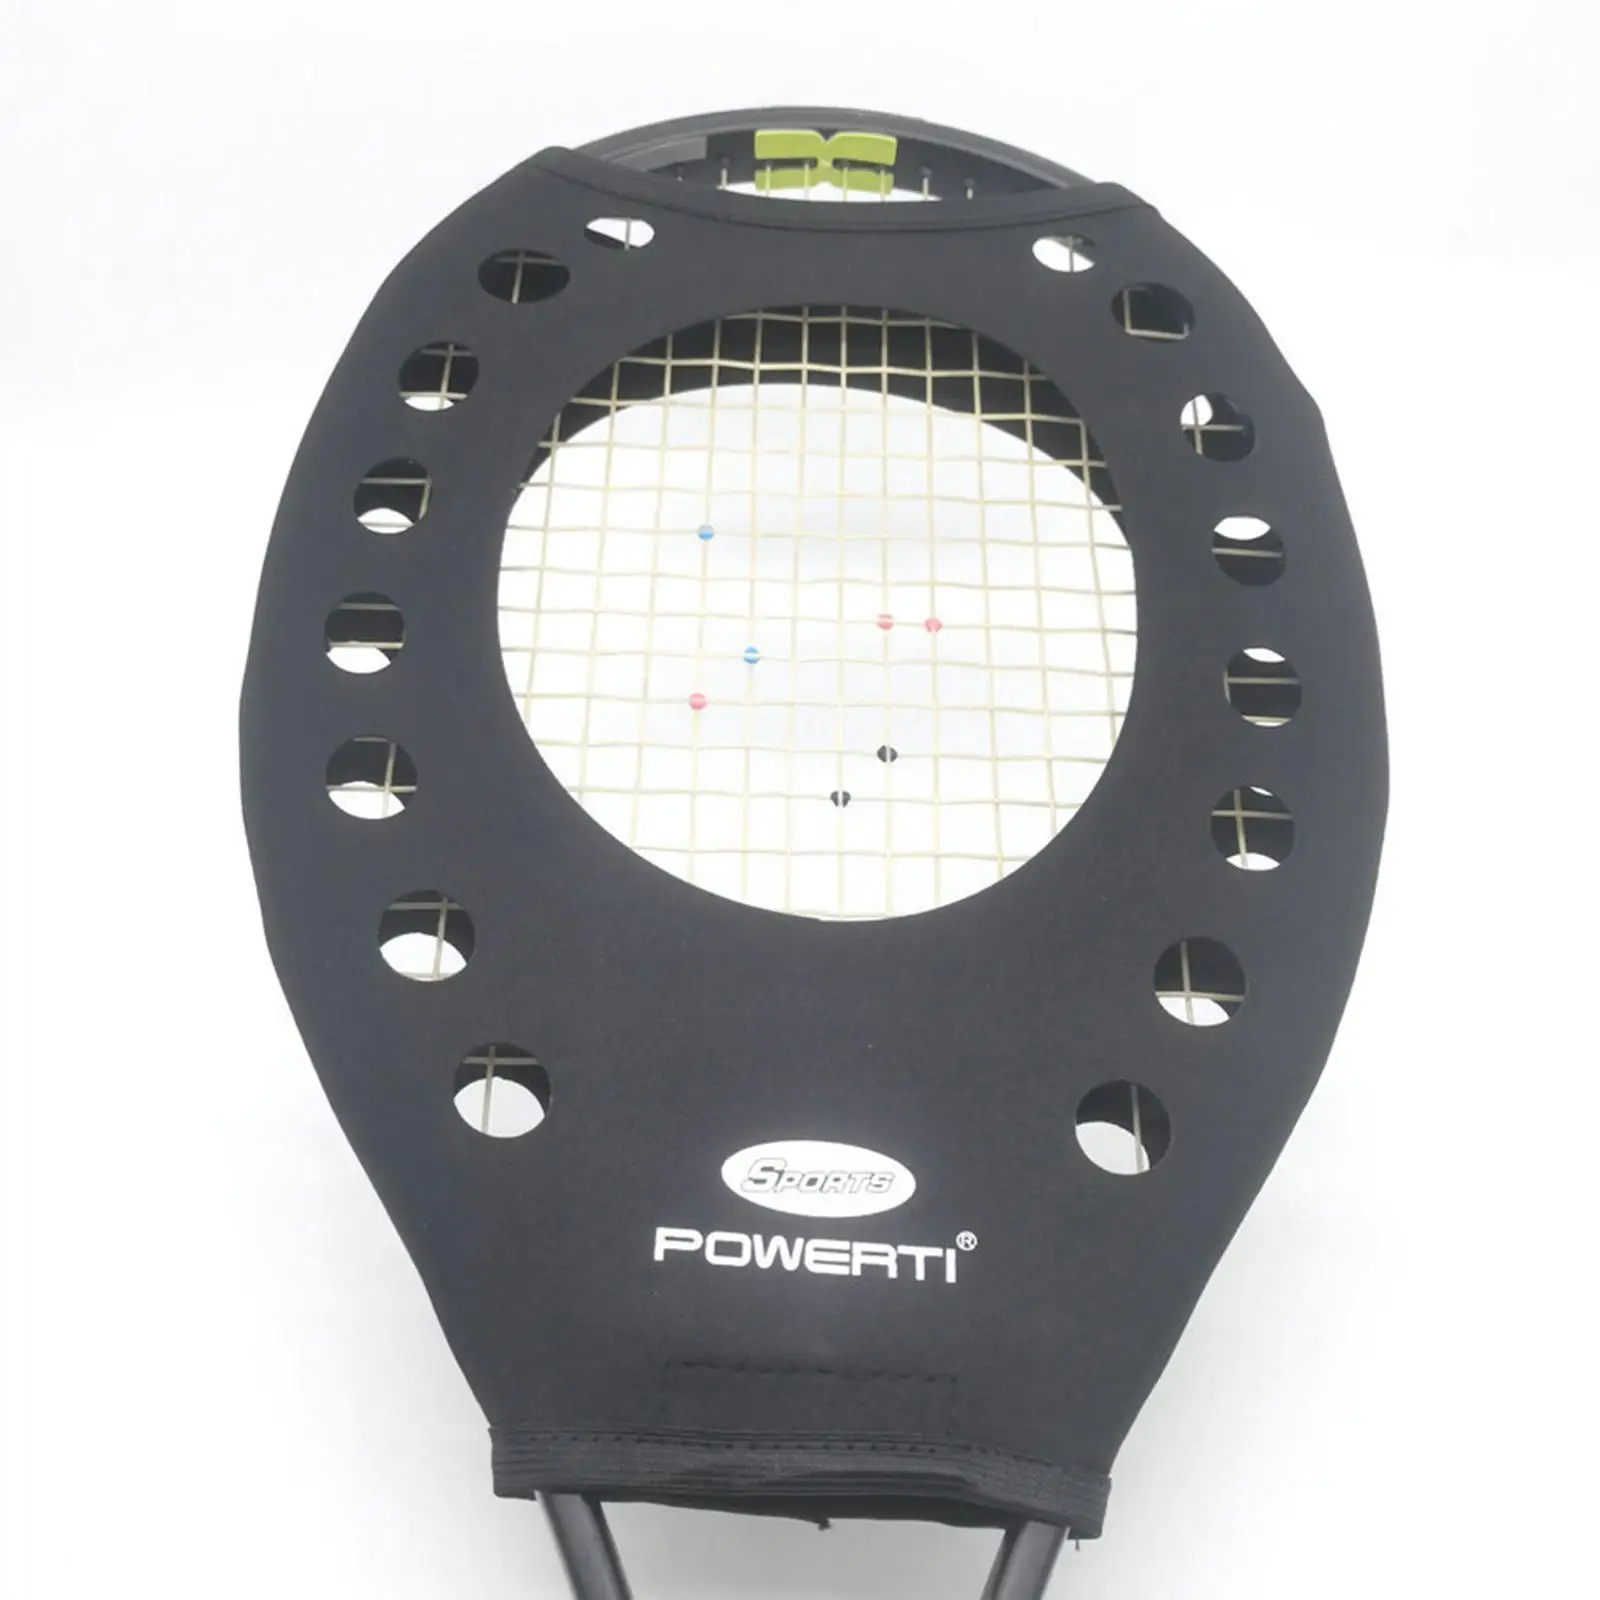 Tennis Racket Sweet Spot Trainer Swing Training Aid Learn to Hit The Center